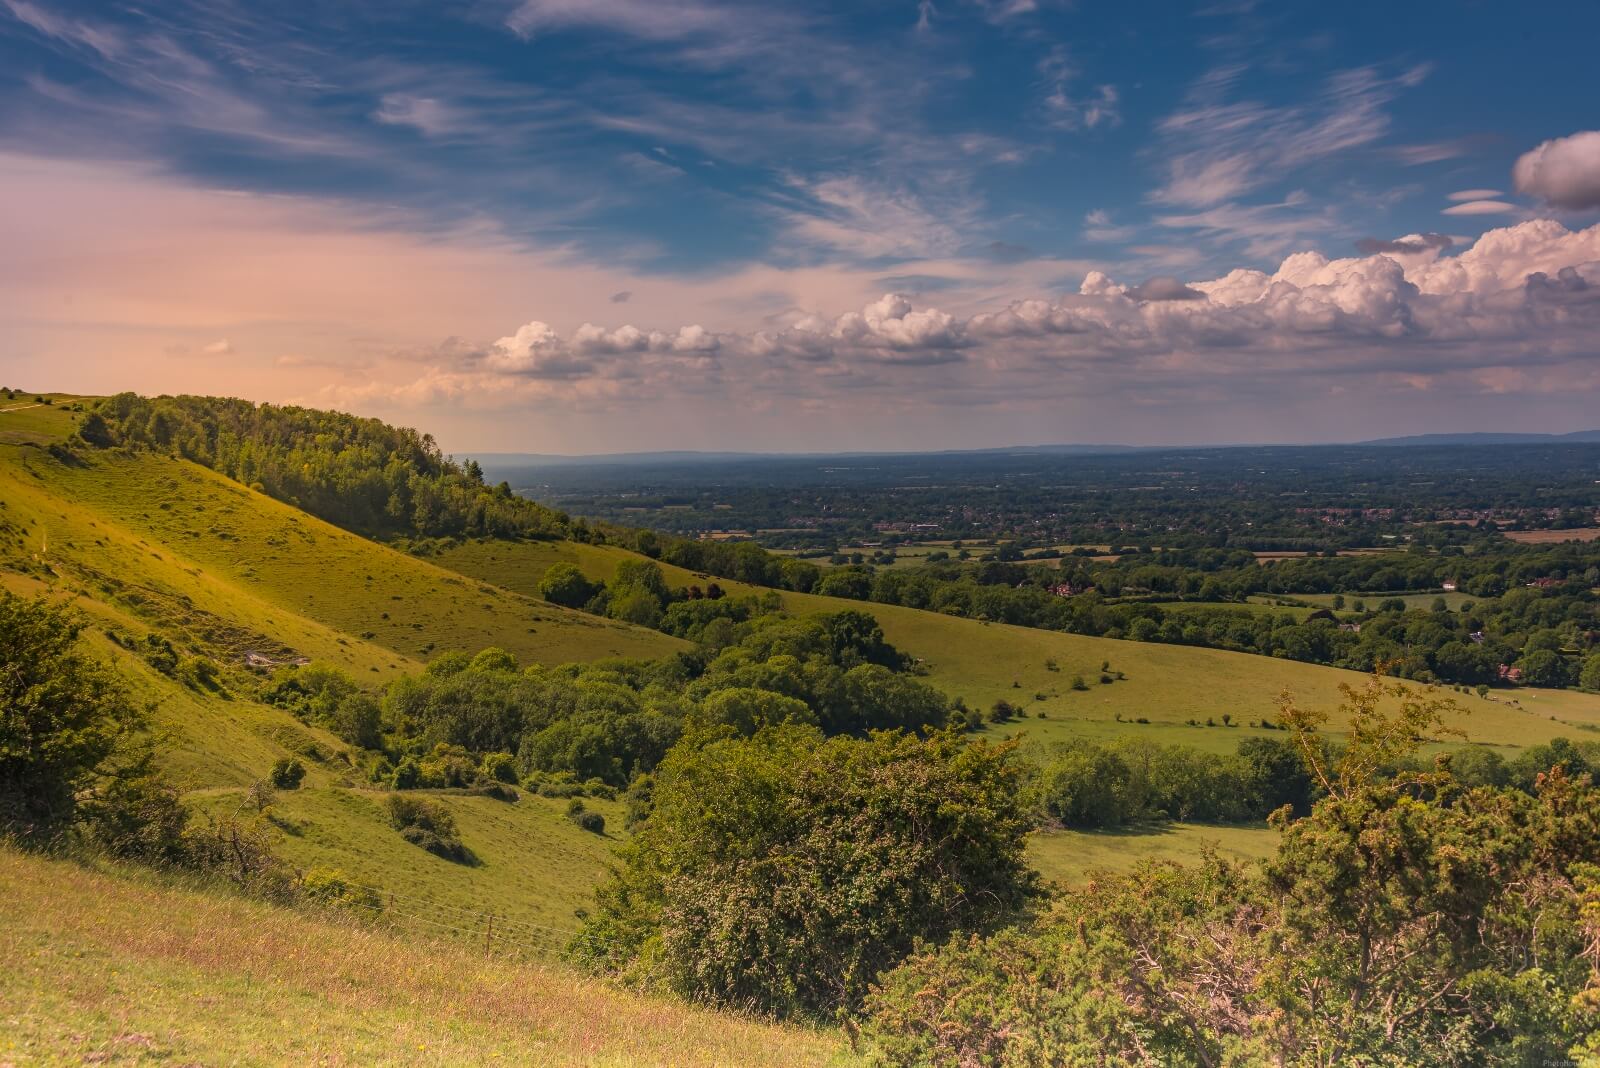 Image of Ditchling Beacon (South Downs NP) by Alan Crozier